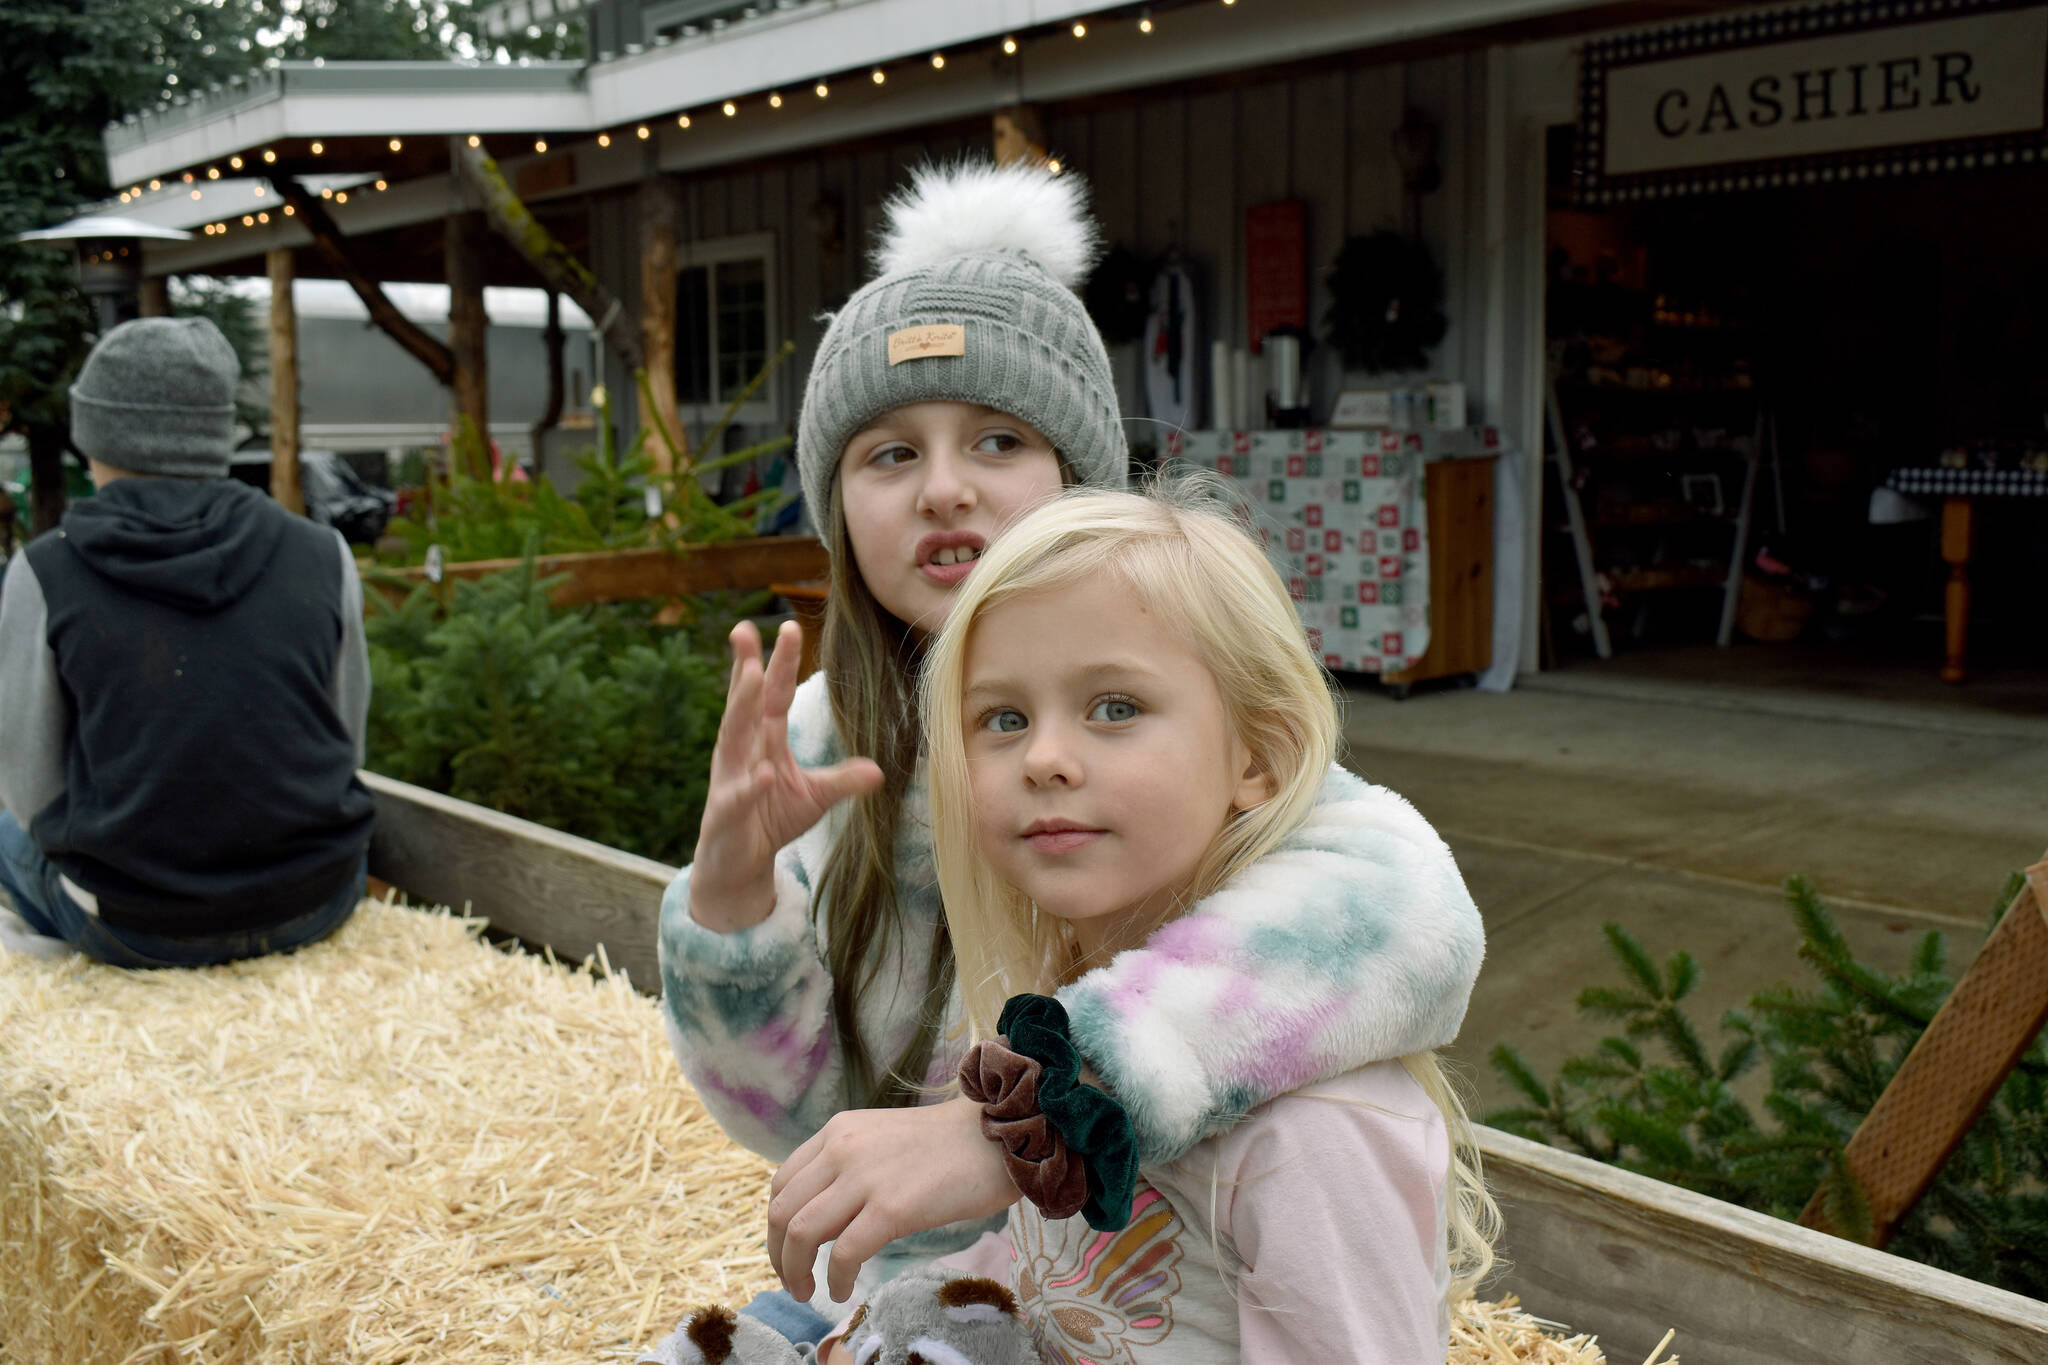 Charlie puts an arm around her little sister Kacey on a hay ride around the tree farm.